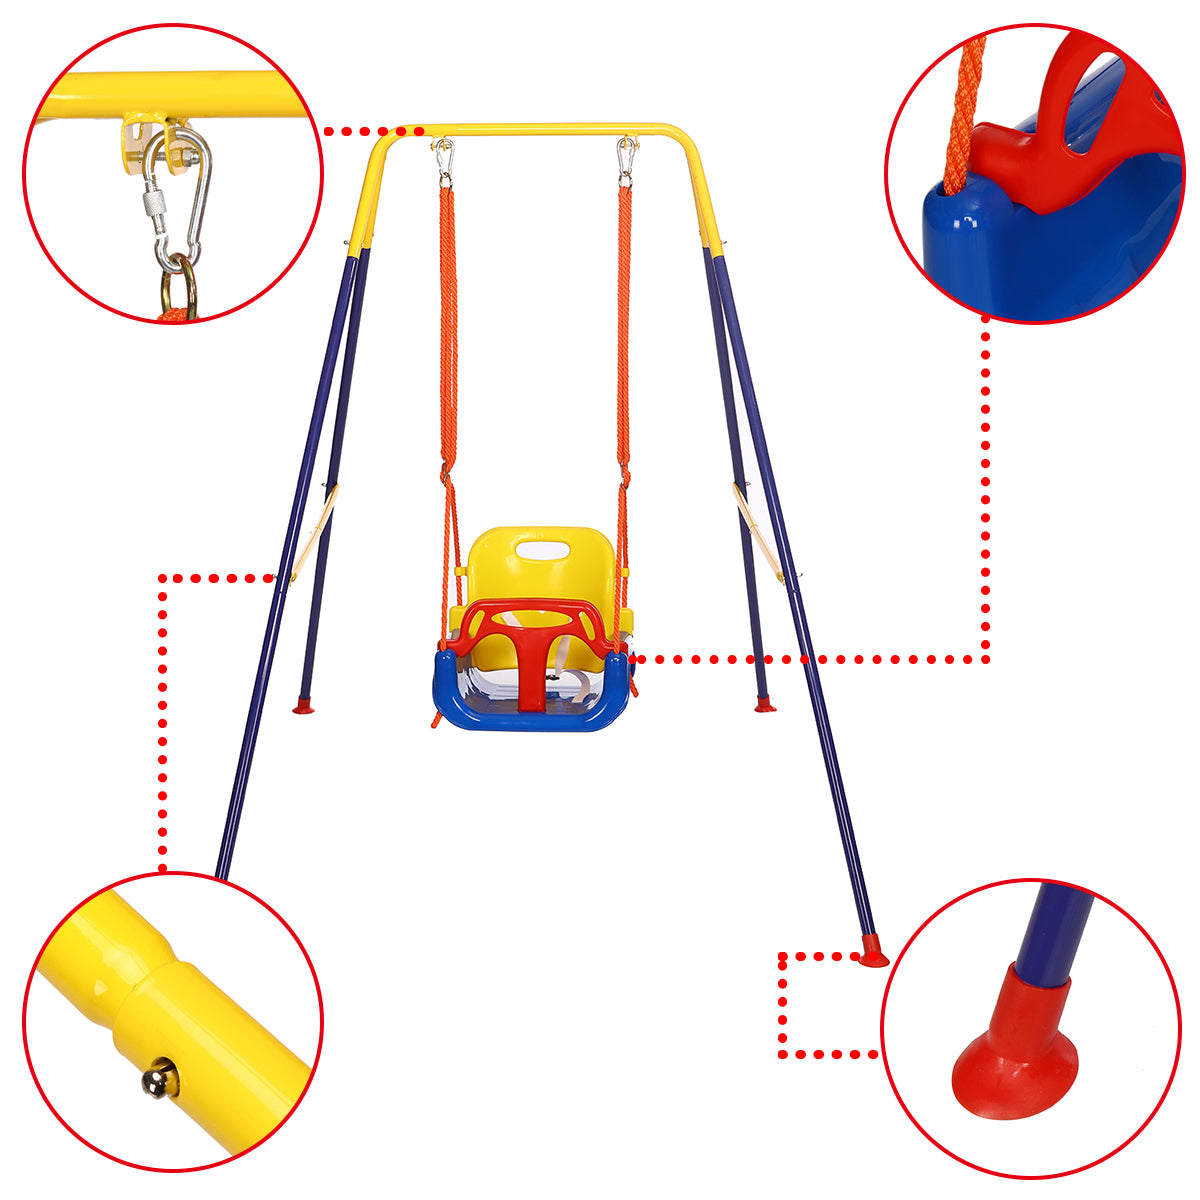 Kid Toddler Swing Seat with Stand Folding Frame 3-in-1 Kid Swing Set with Safety Seat Max 110Pounds for utdoor Indoor Backyard Play - Blue&Yellow